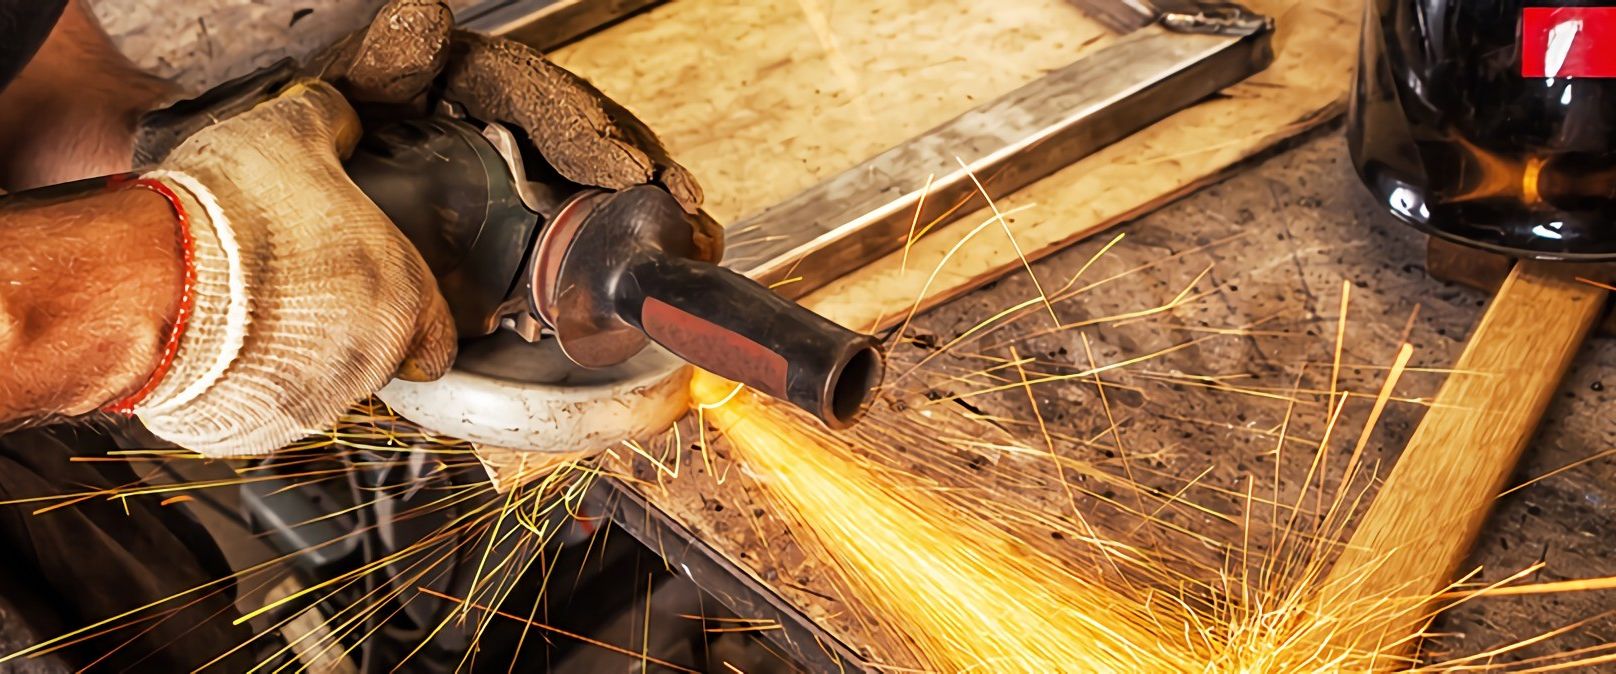 What Is an Angle Grinder in Welding, and How Is It Used? - Tulsa